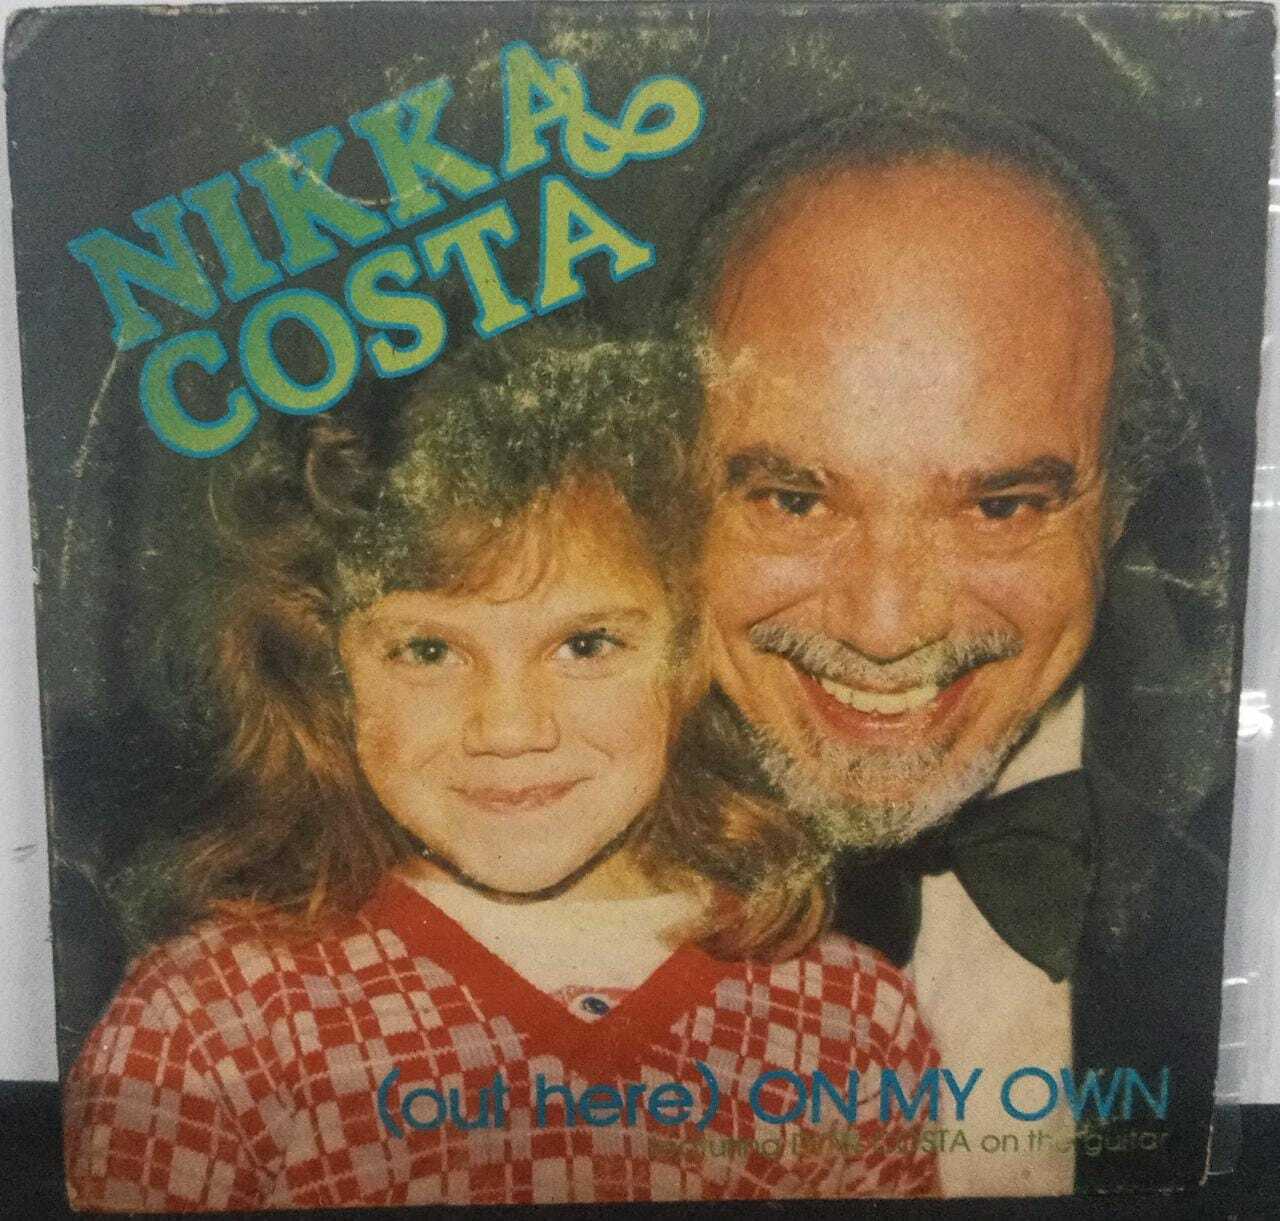 Vinil Compacto - Nikka Costa - Out Here On My Own